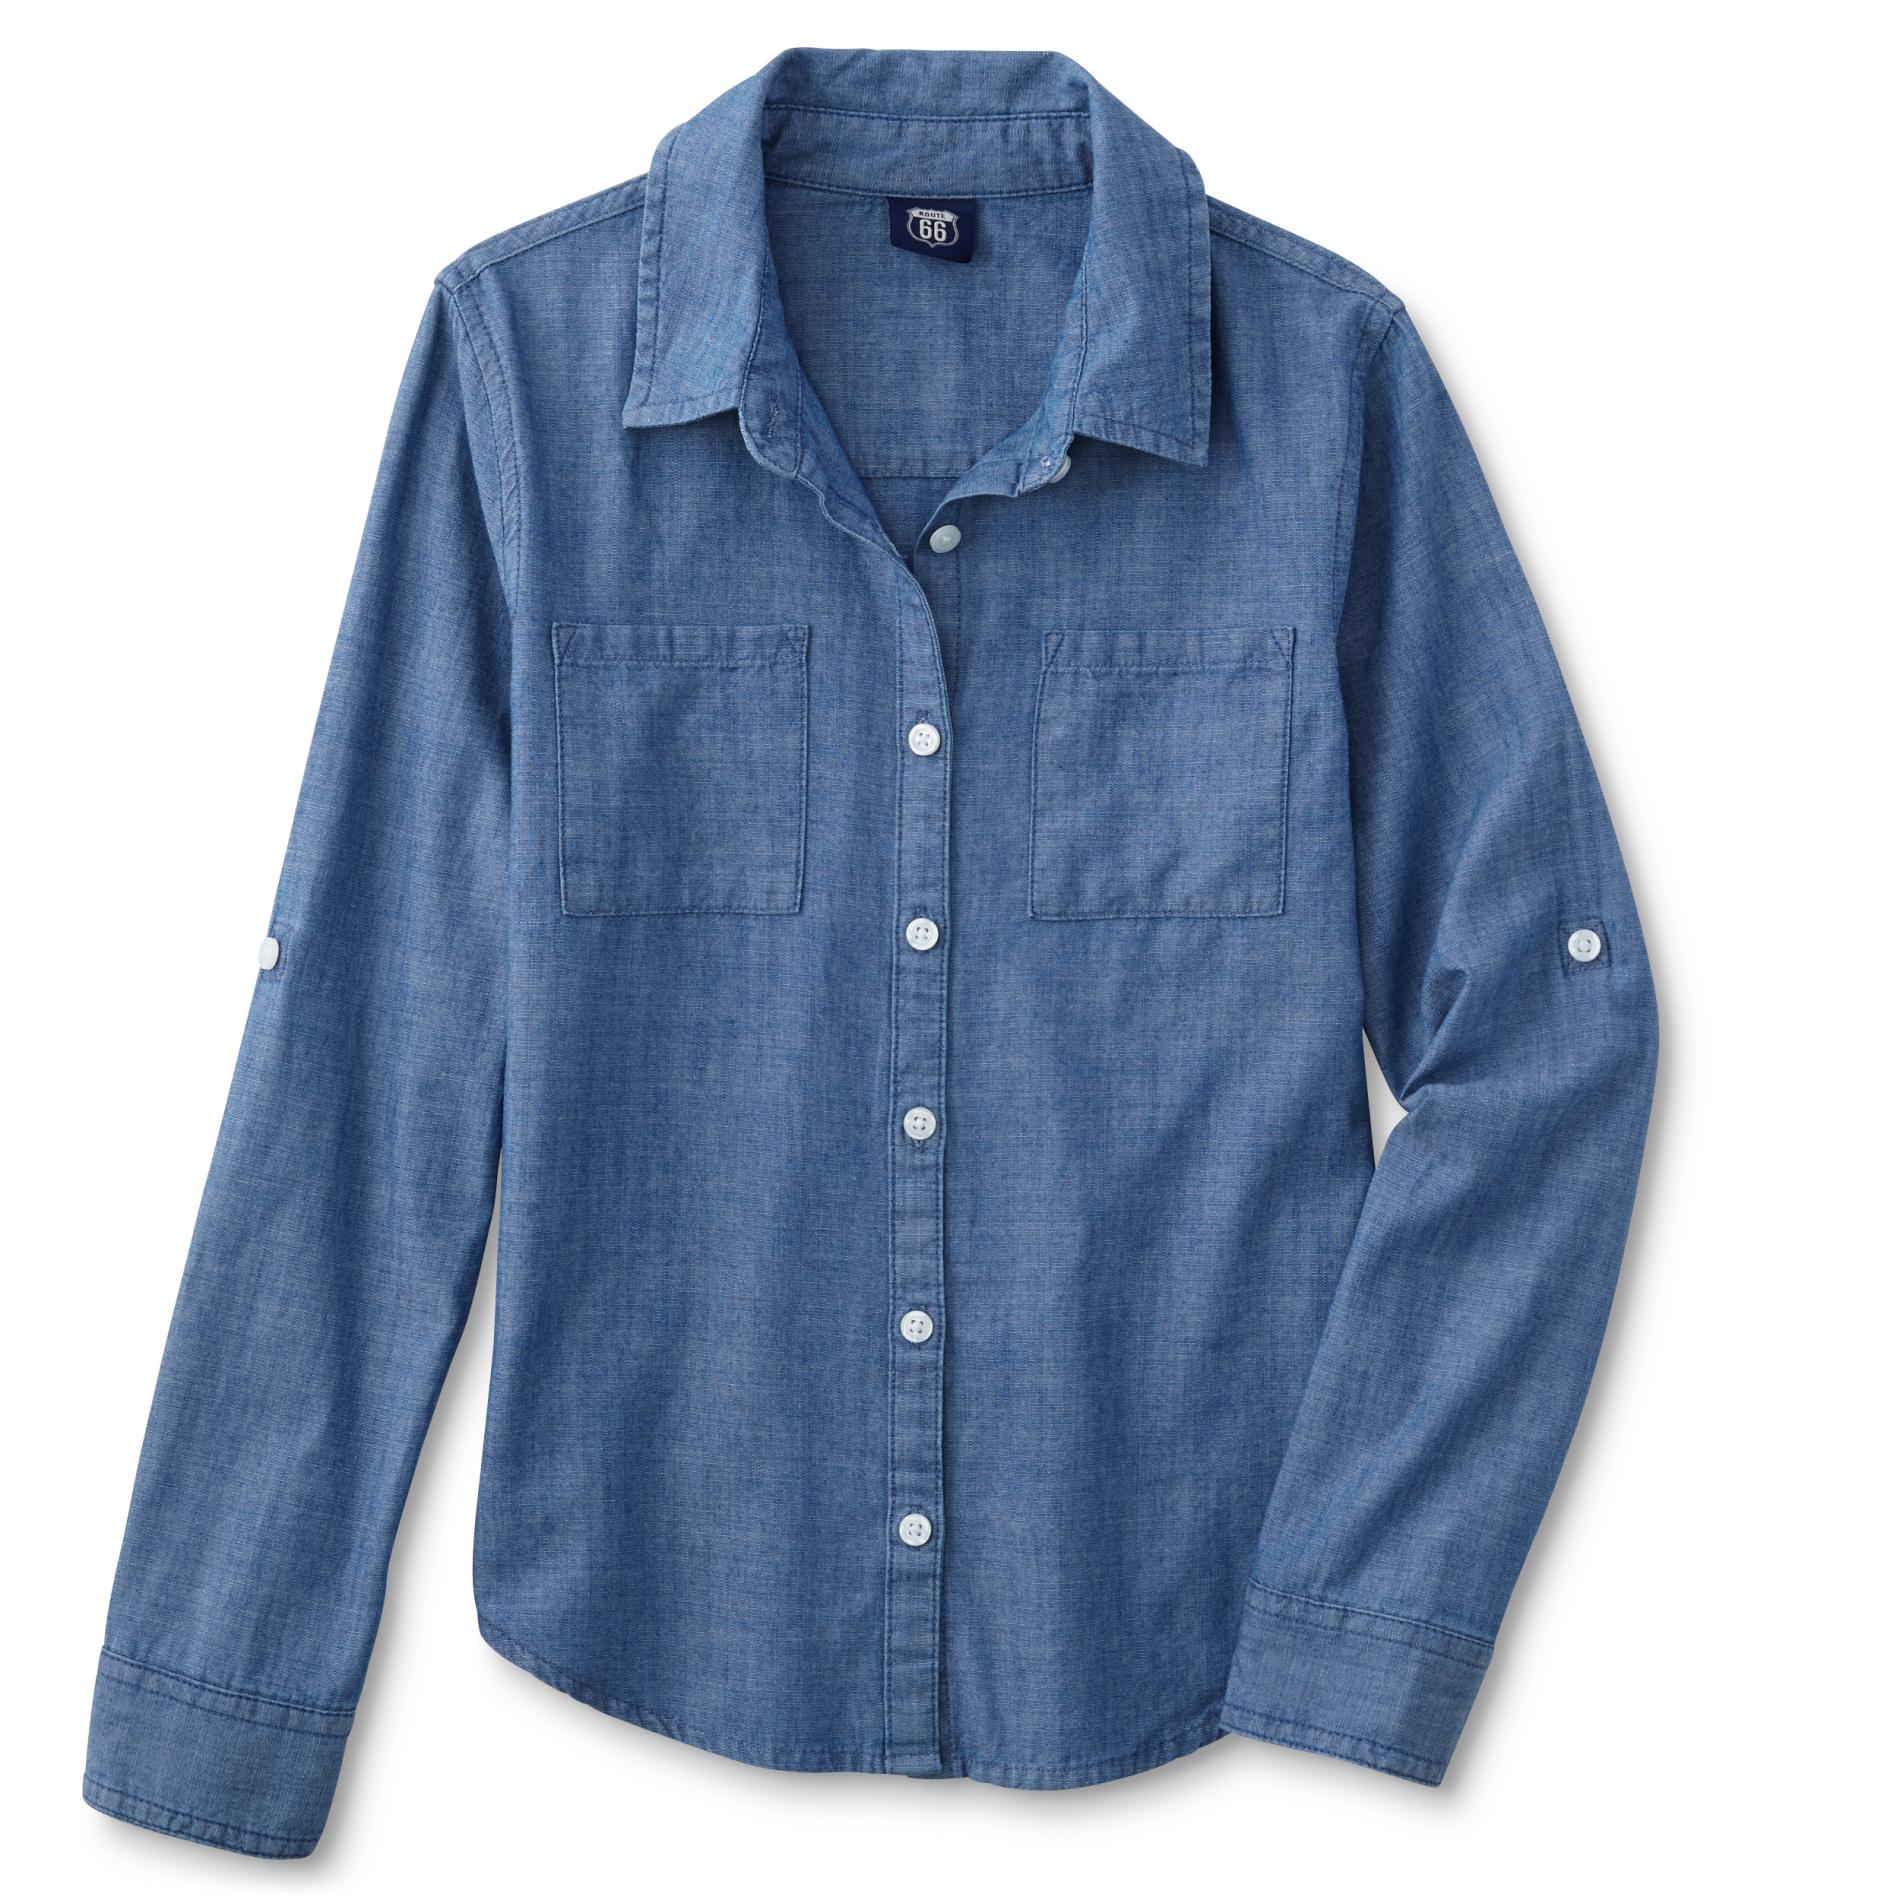 Route 66 Girls' Button-Front Chambray Shirt